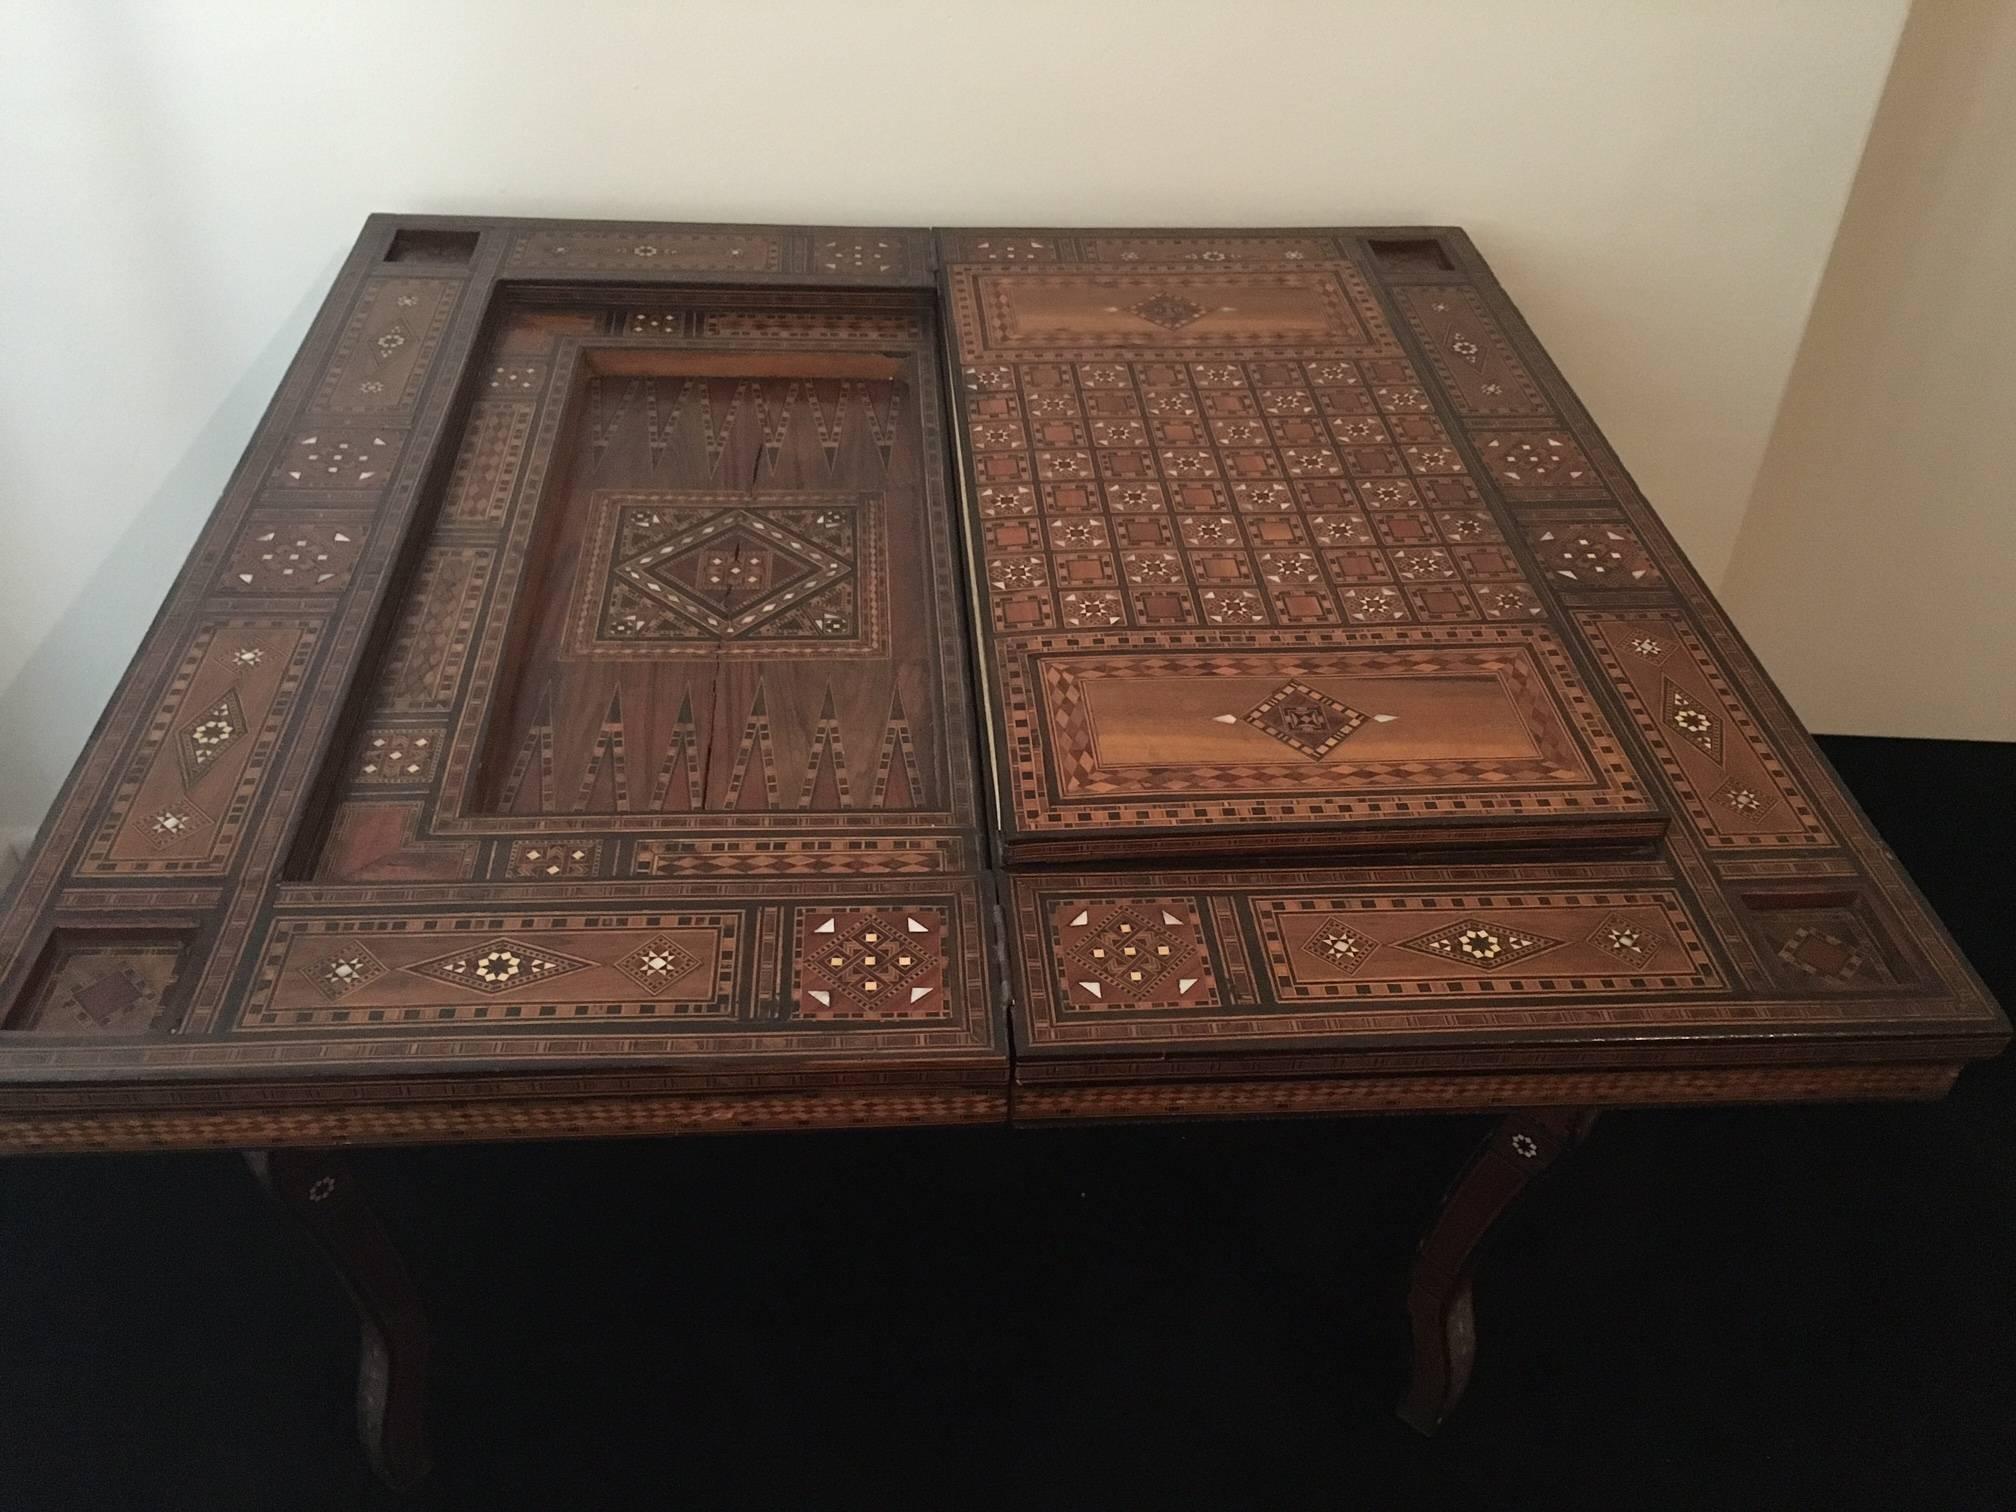 19the century game table inlaid with bone, ebony, mother-of-pearl geometrical patterns.